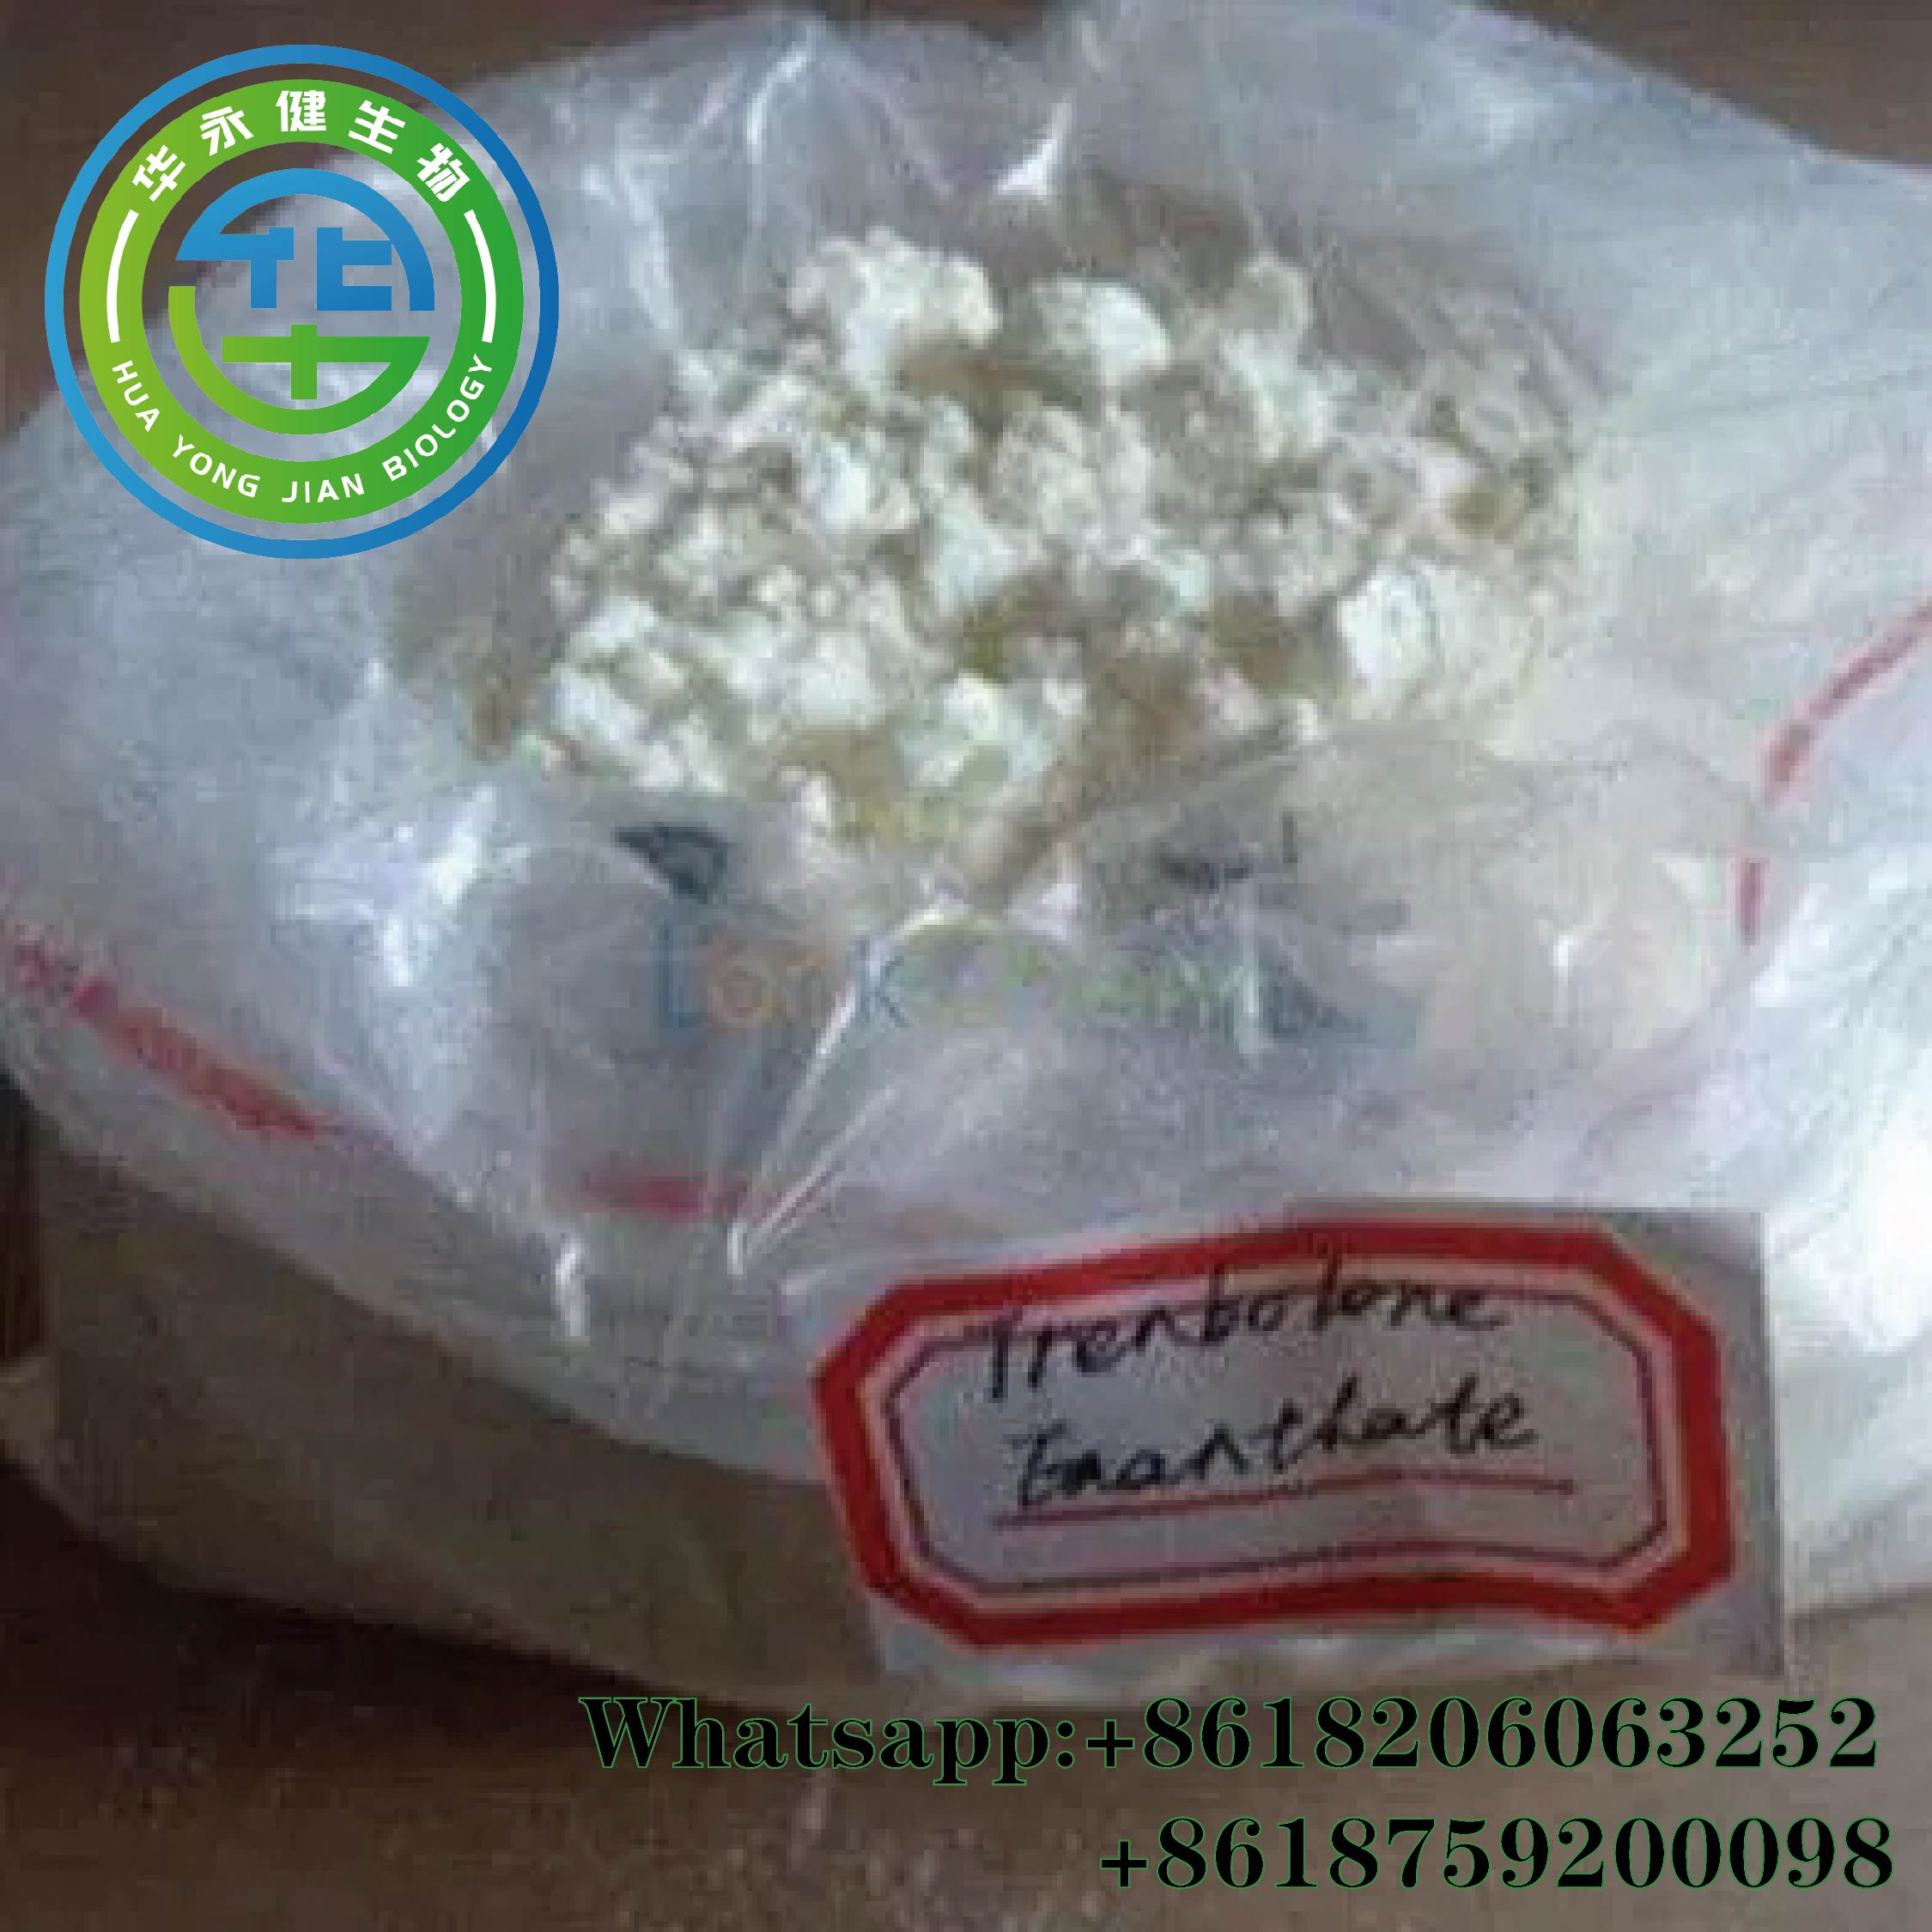 Trenbolone Enanthate/Parabolan Safeshipping Raw Steroid Powder For Improving Sleep CAS: 10161-33-8 